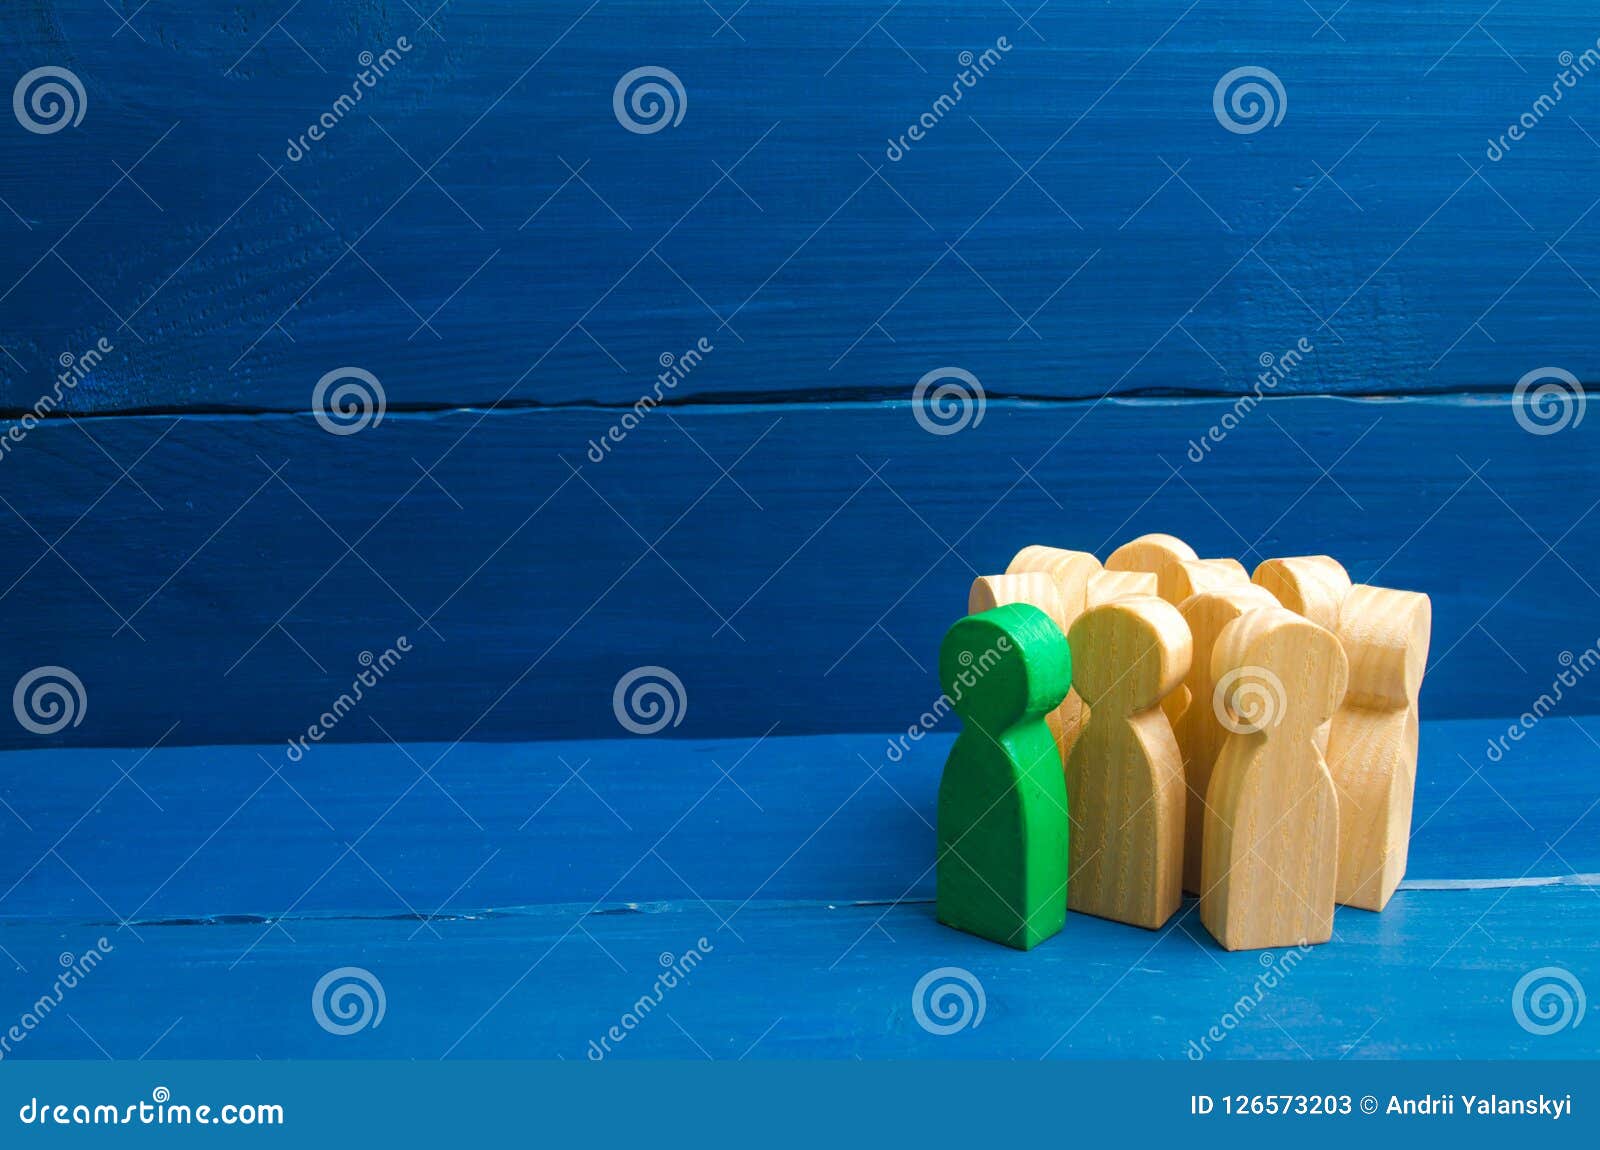 crowd, meeting, social activity. group people figurines. society, social group. herd instinct, management of people.